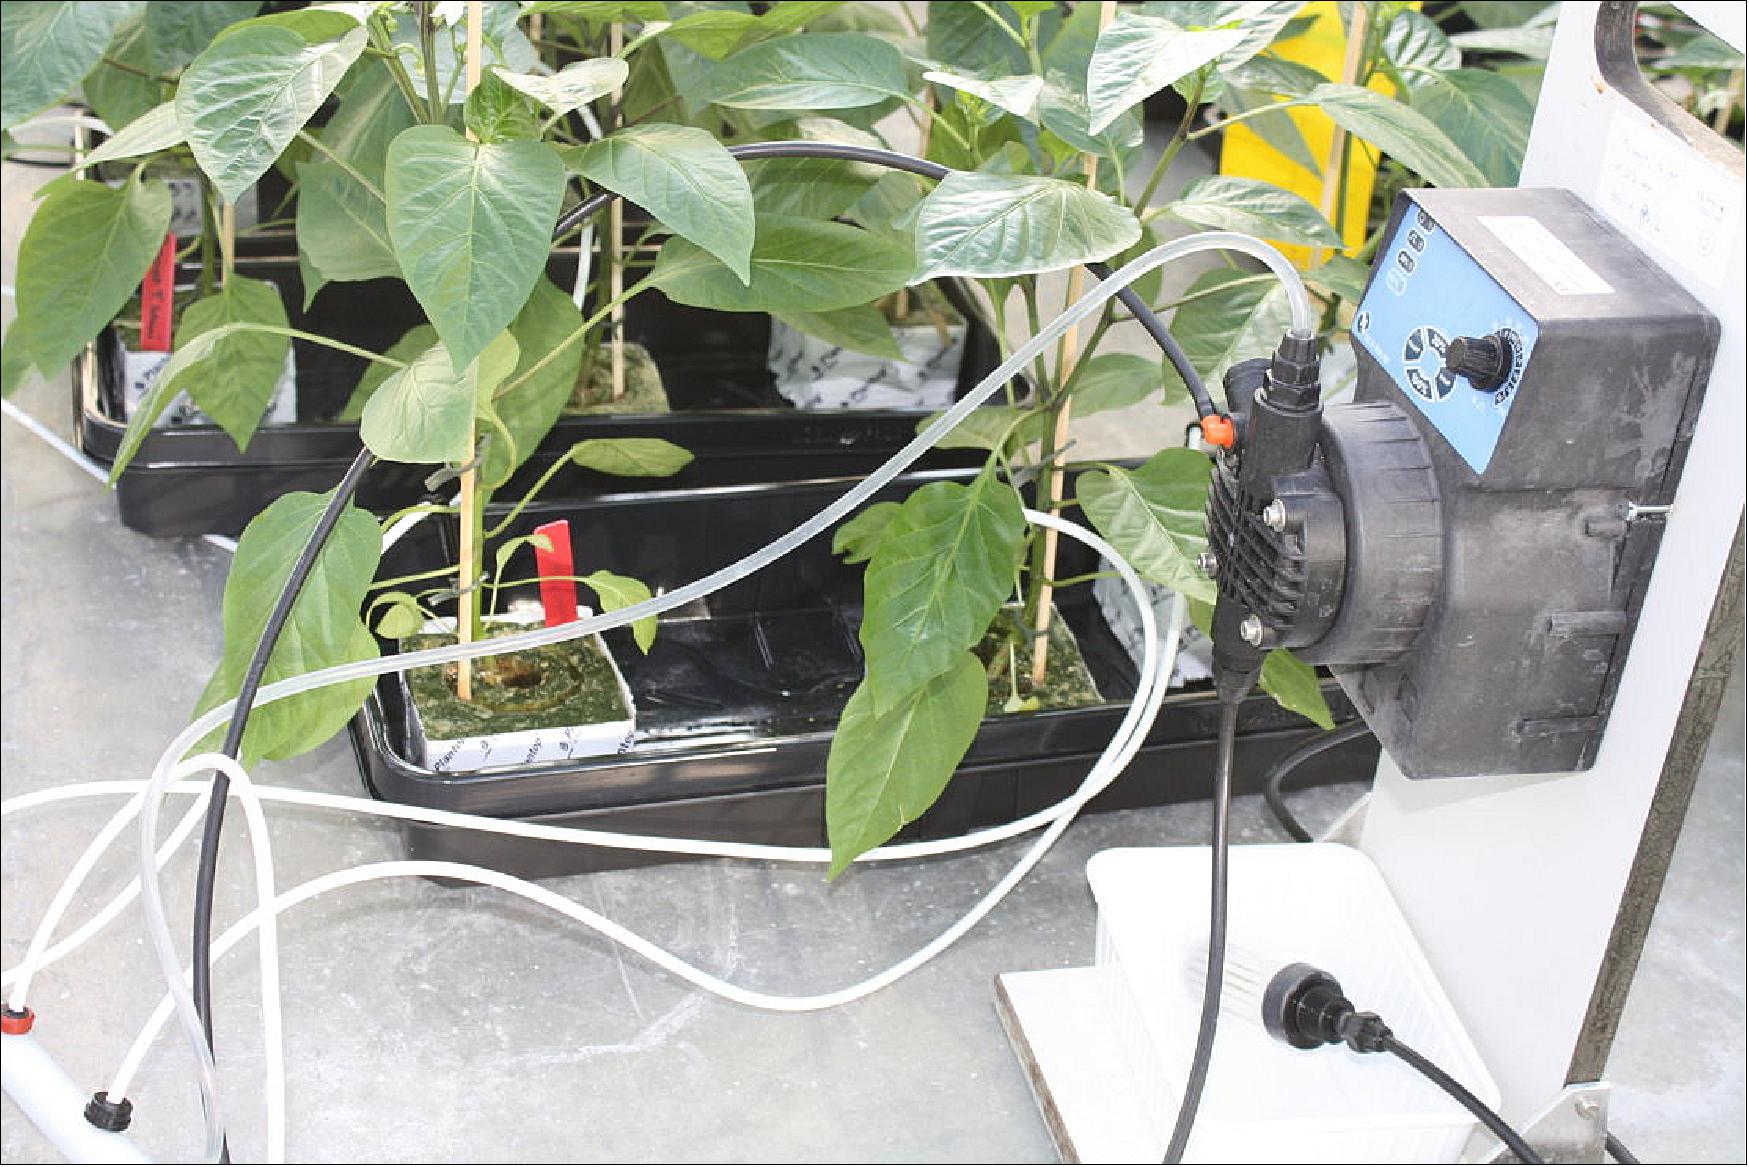 Figure 97: Dosing of minerals for growing tomato and pepper plants (image credit: Groen Agro Control)